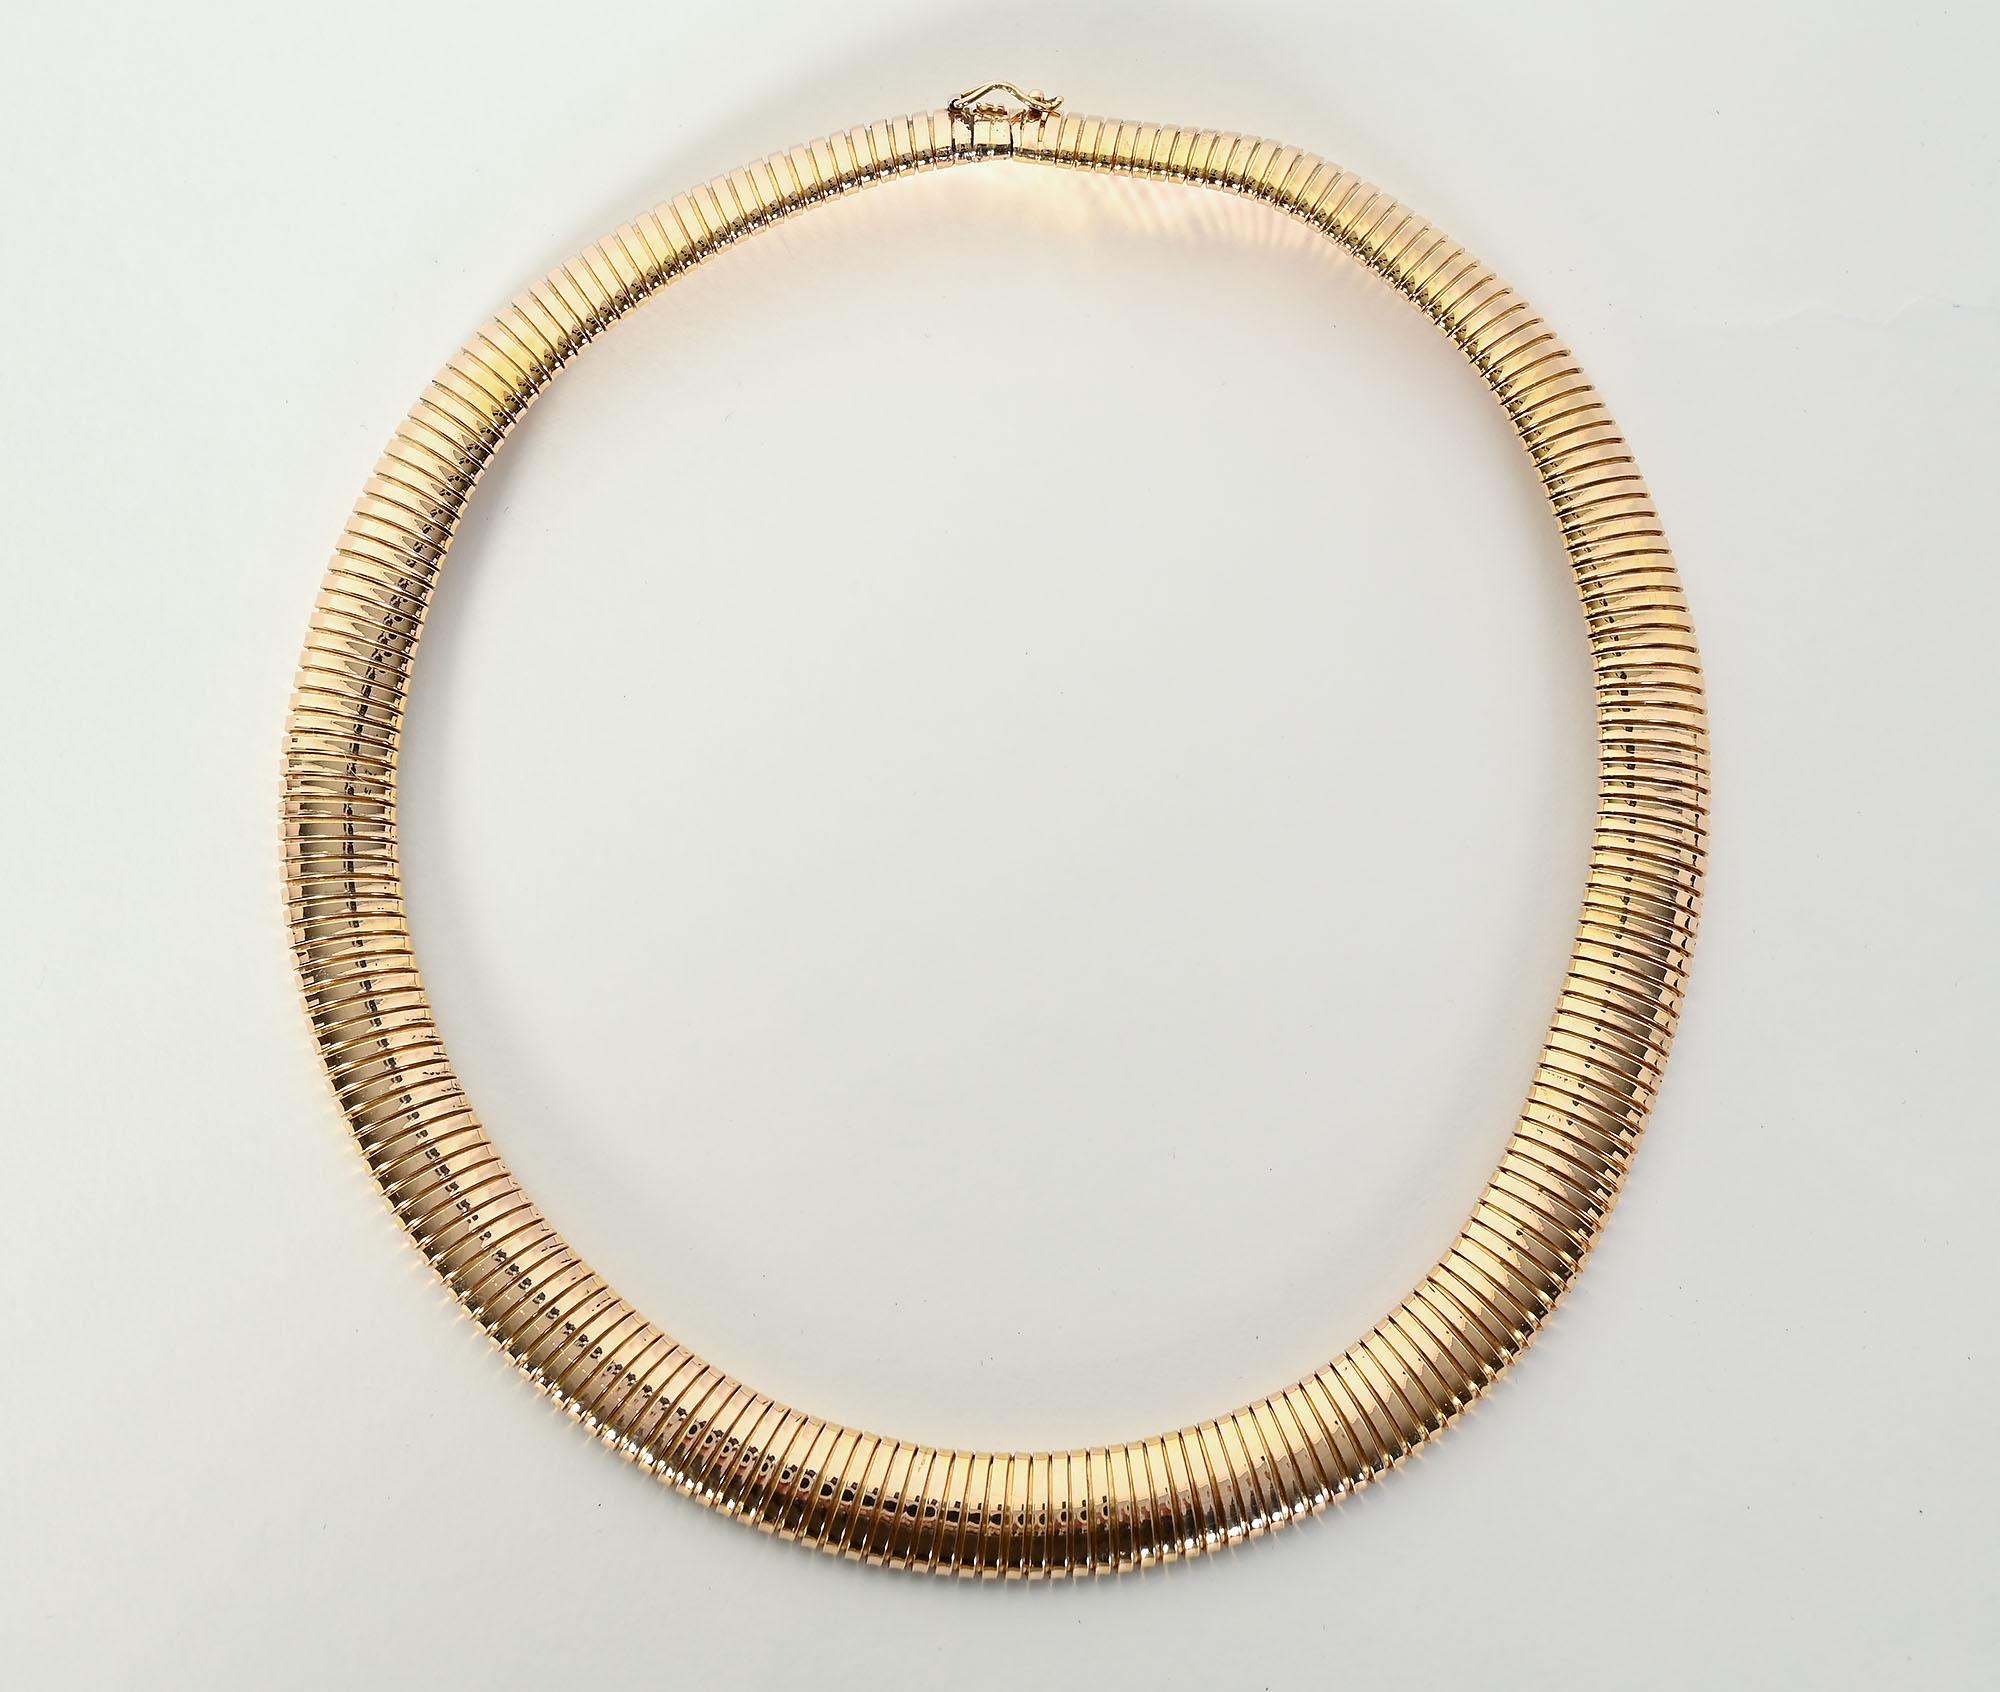 This springy coil necklace, most popular in the Retro era, also goes by the unfortunate name of gas pipe. The name is so unappealing that I could not put it in the title. This in no way reflects upon the beauty of the necklace. This example is wider